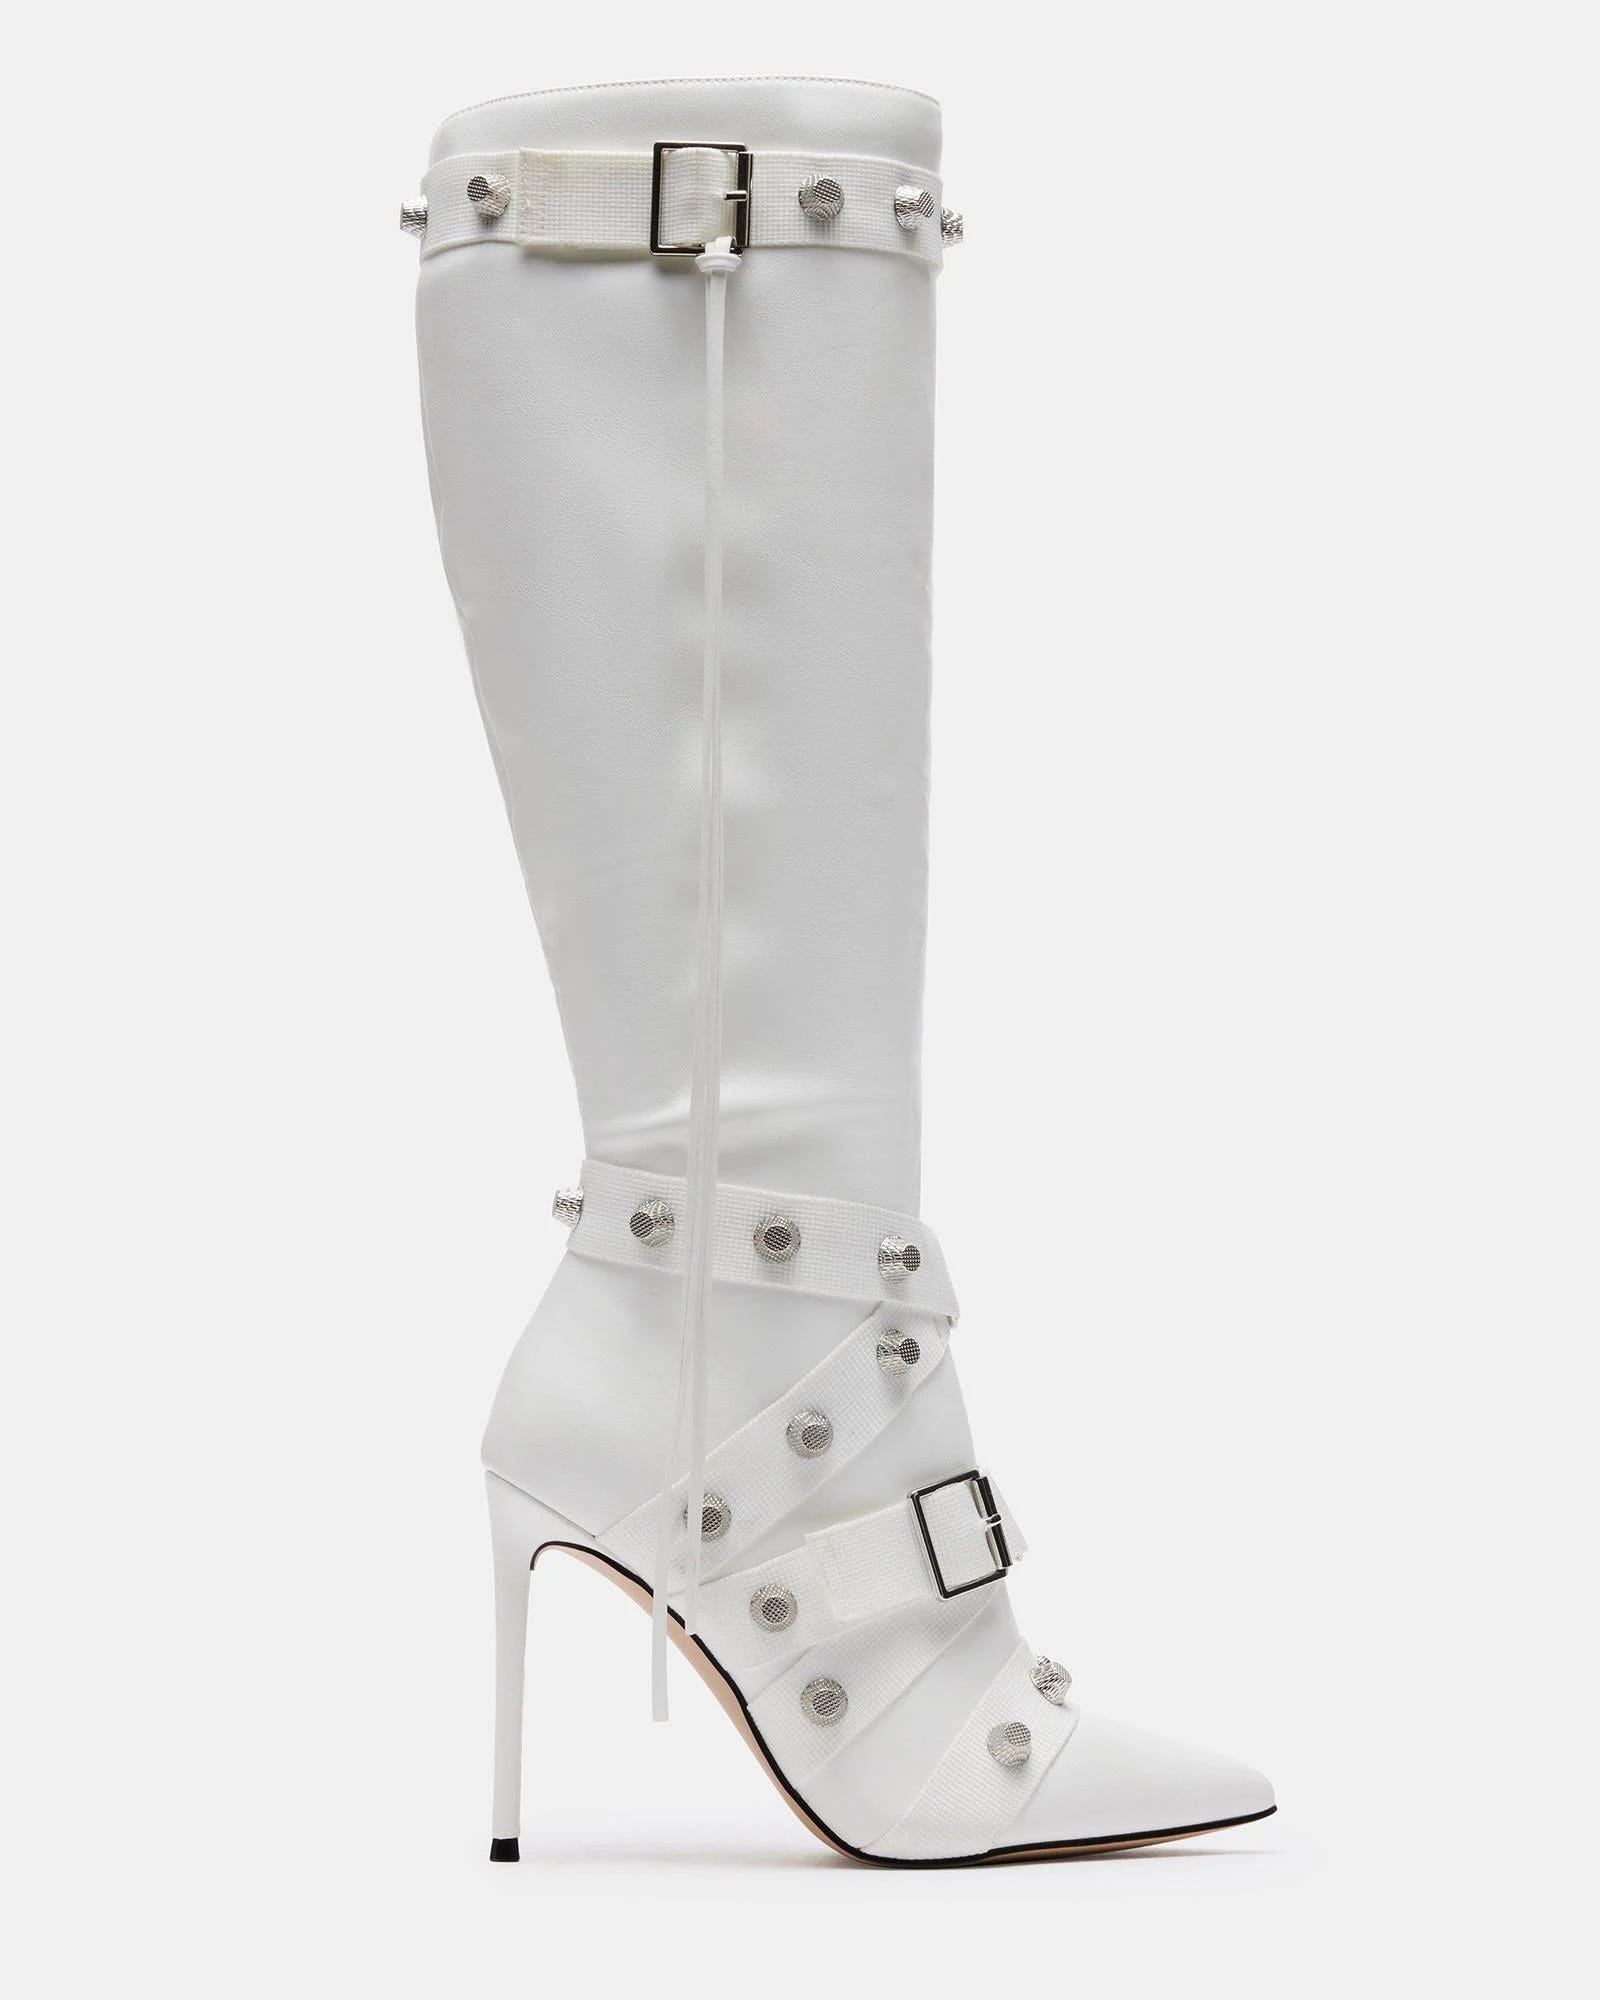 Steve Madden Fink White Pointed Toe Boots | Image